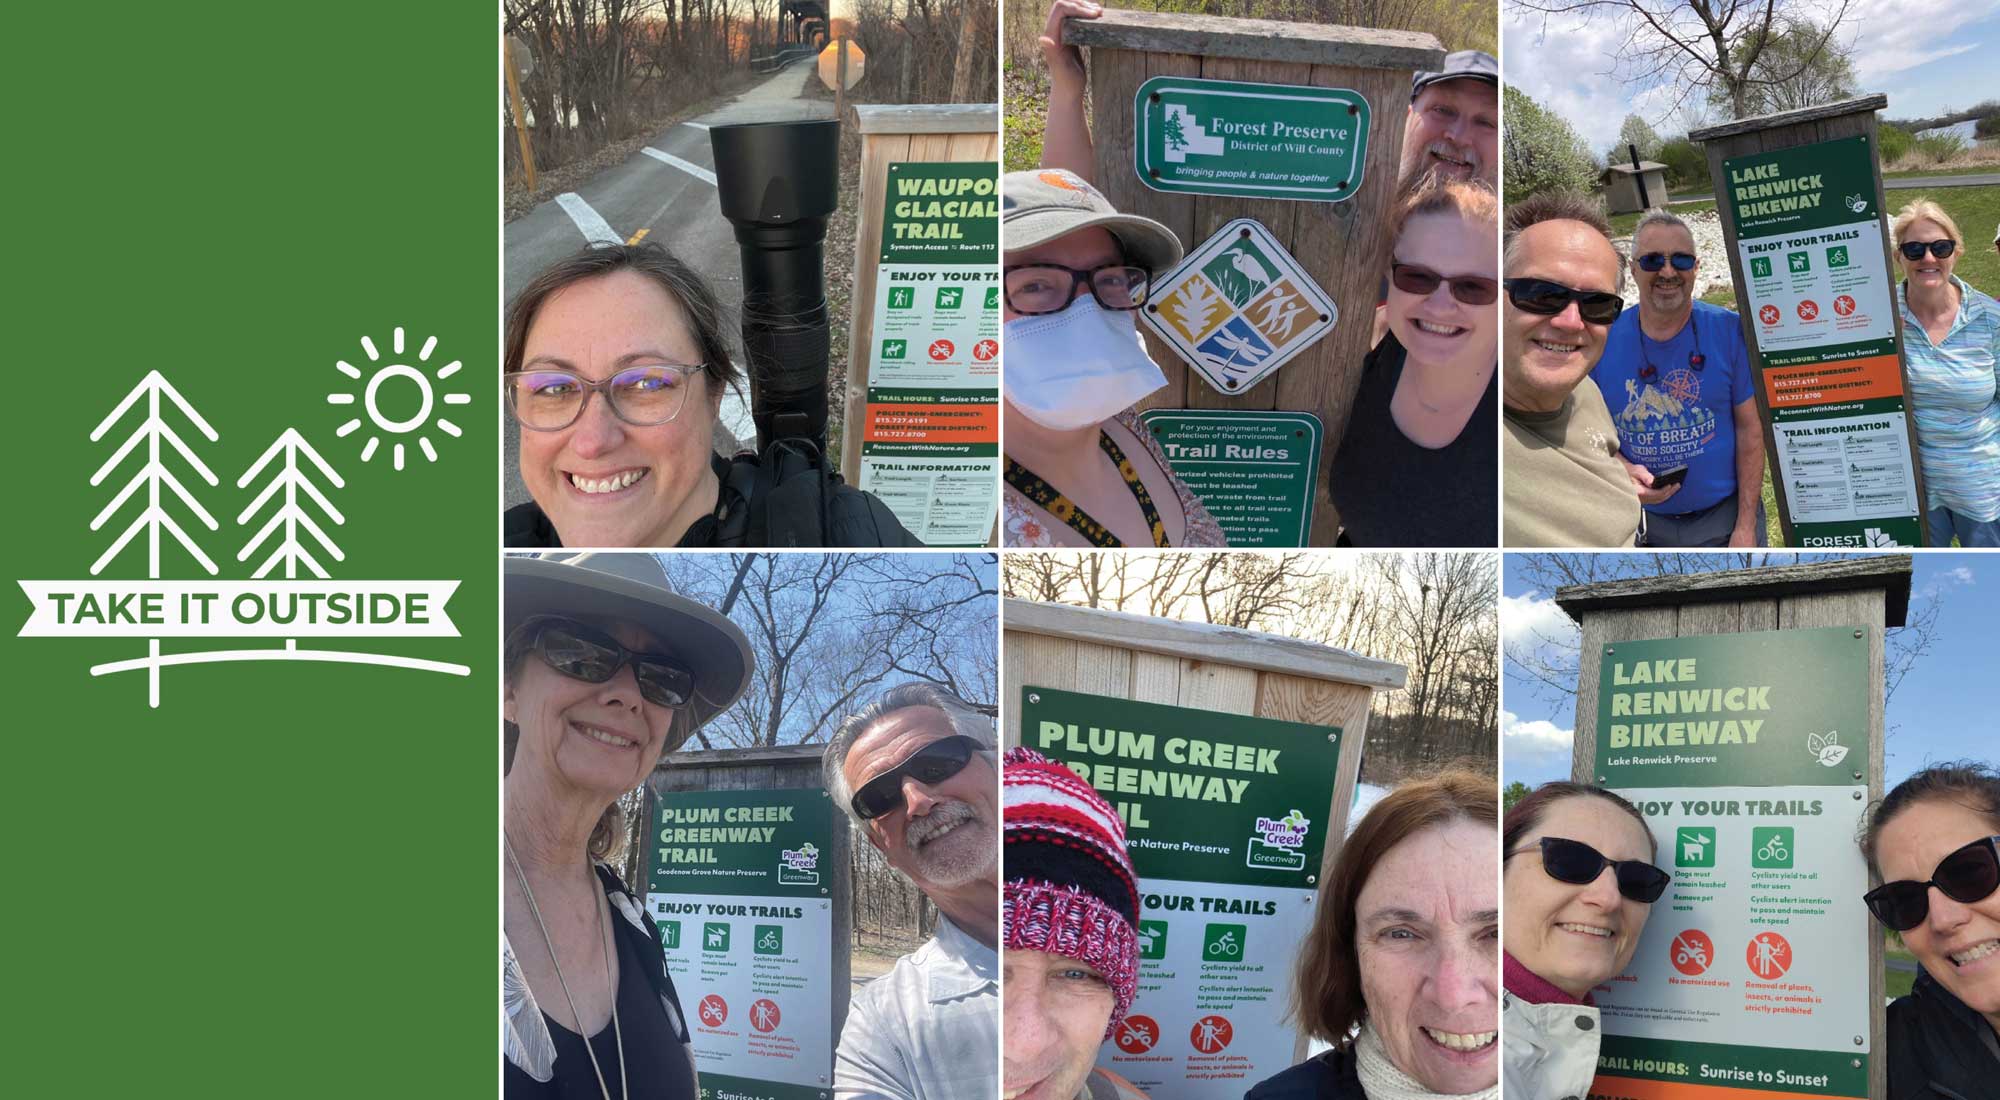 Selfies showing people participating in the Take It Outside challenge.